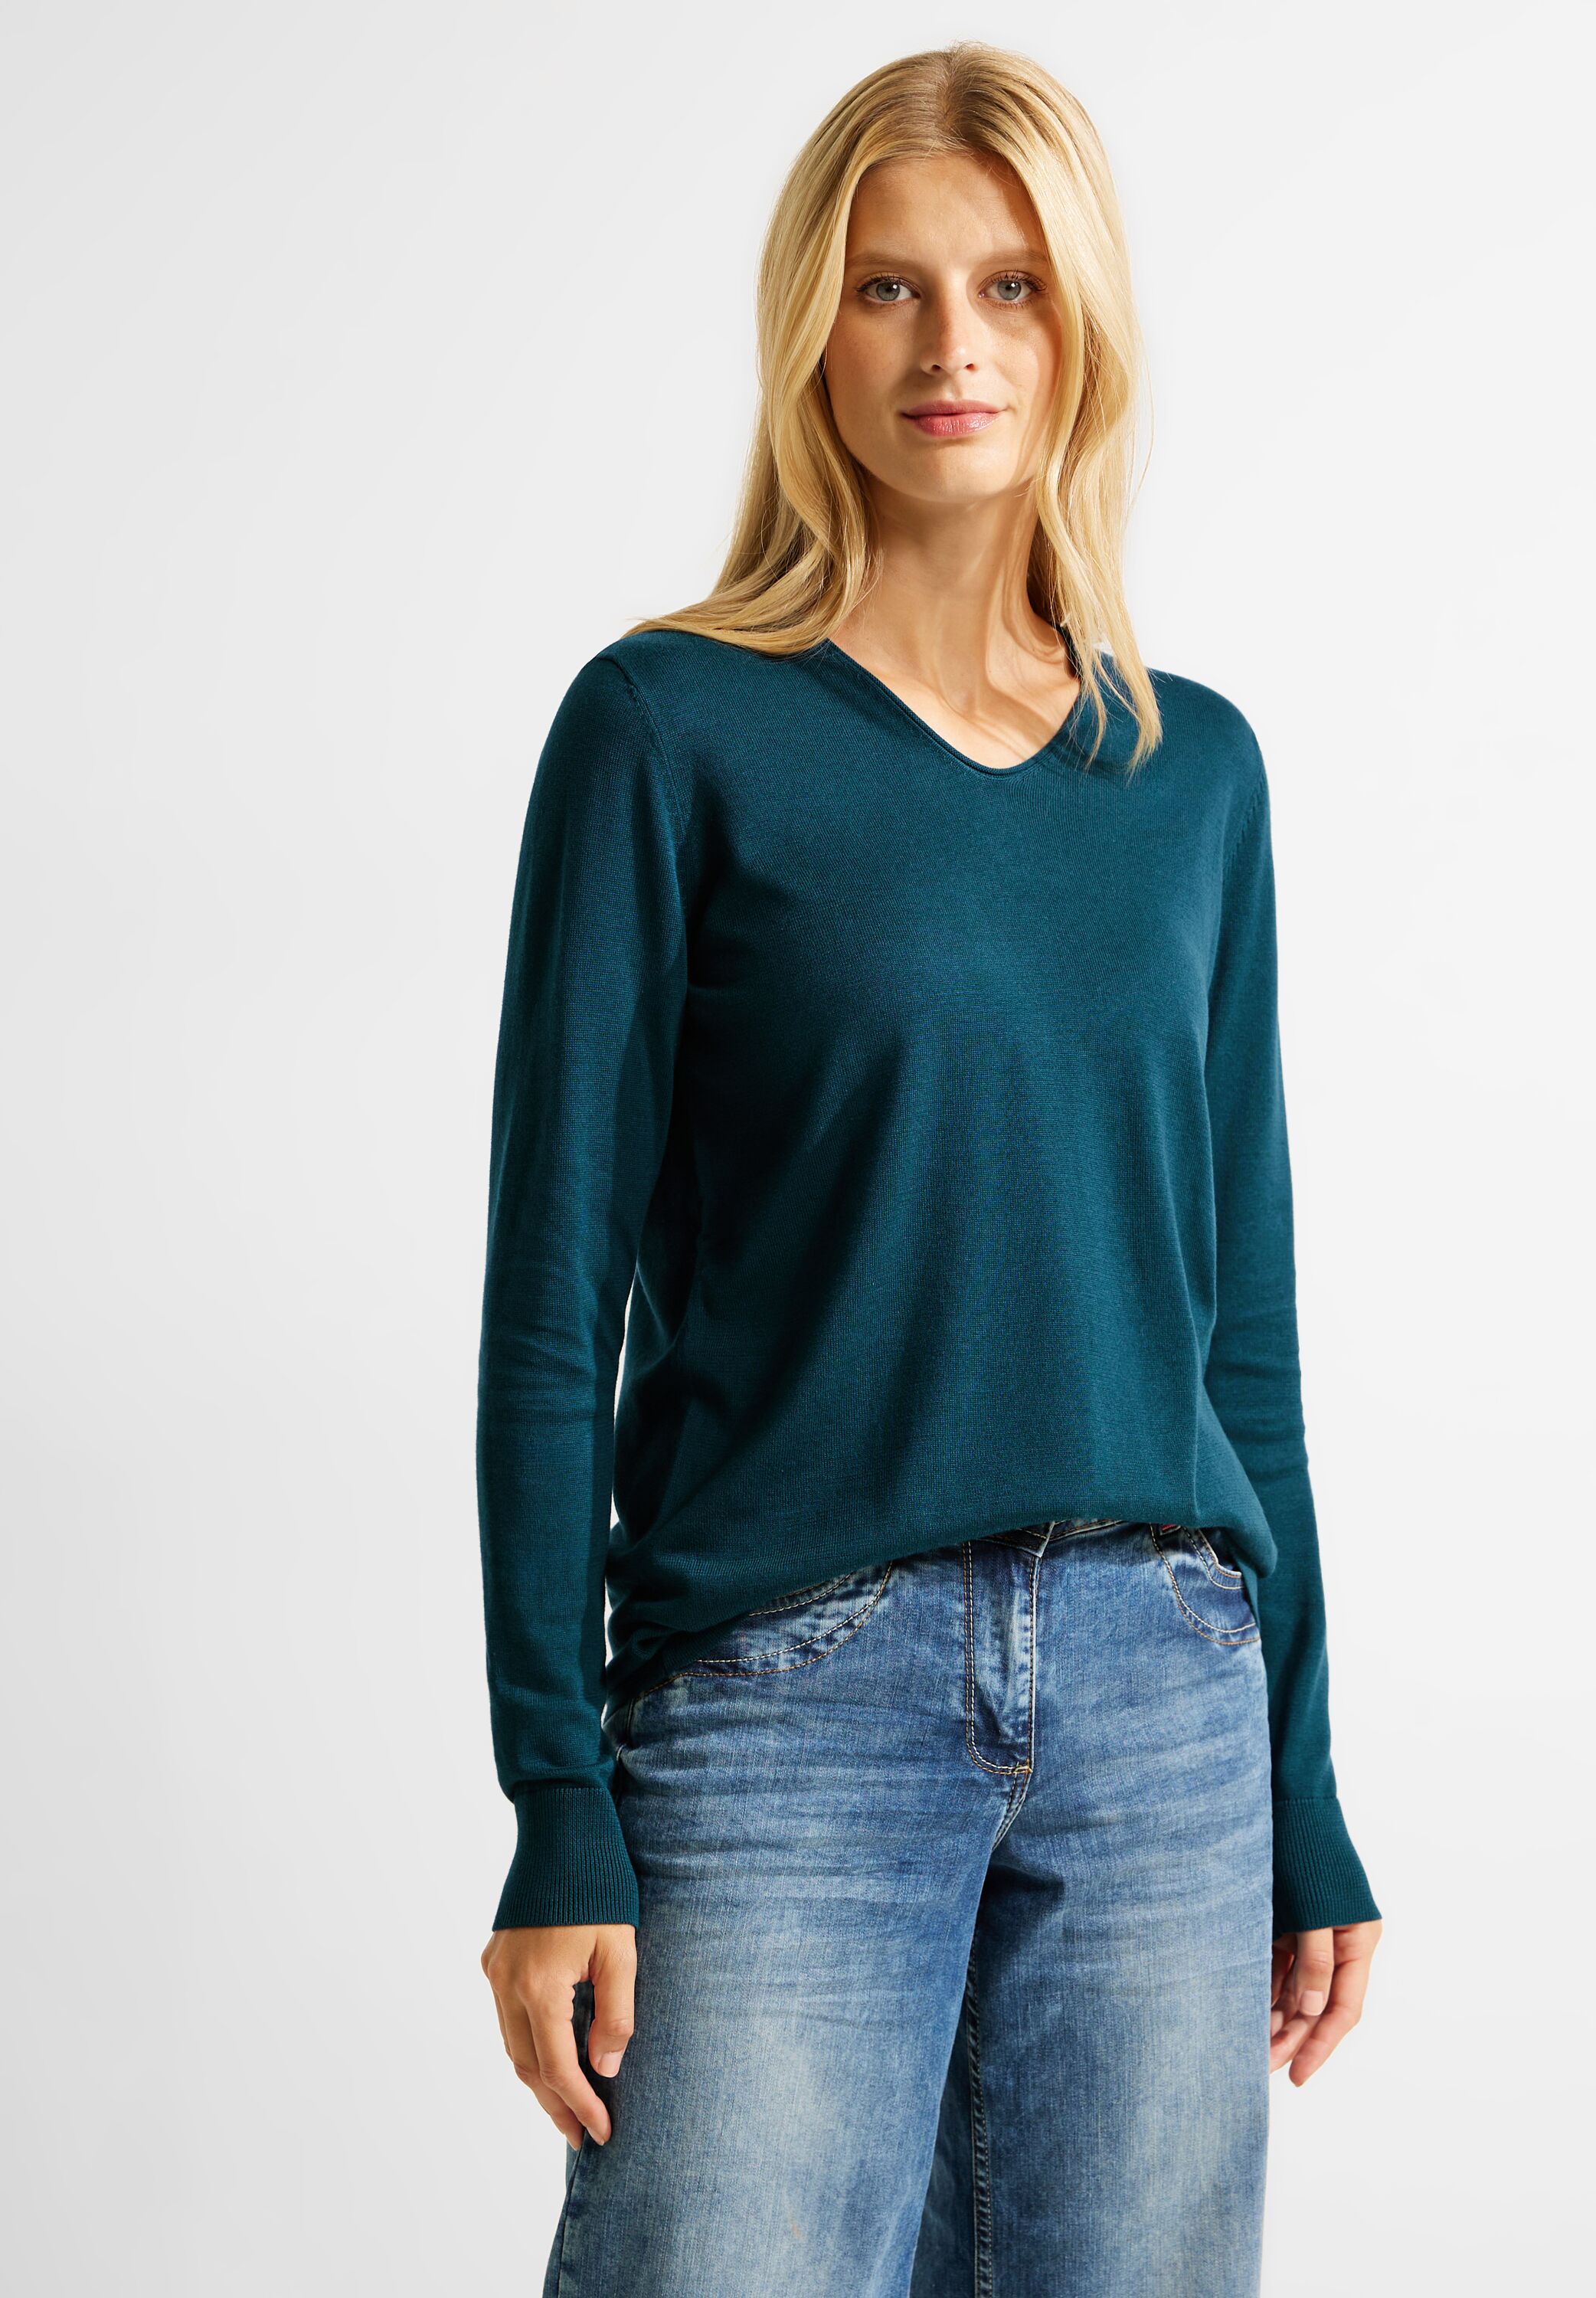 Deep CECIL Mode in Pullover CONCEPT Green - Lake B302342-14926